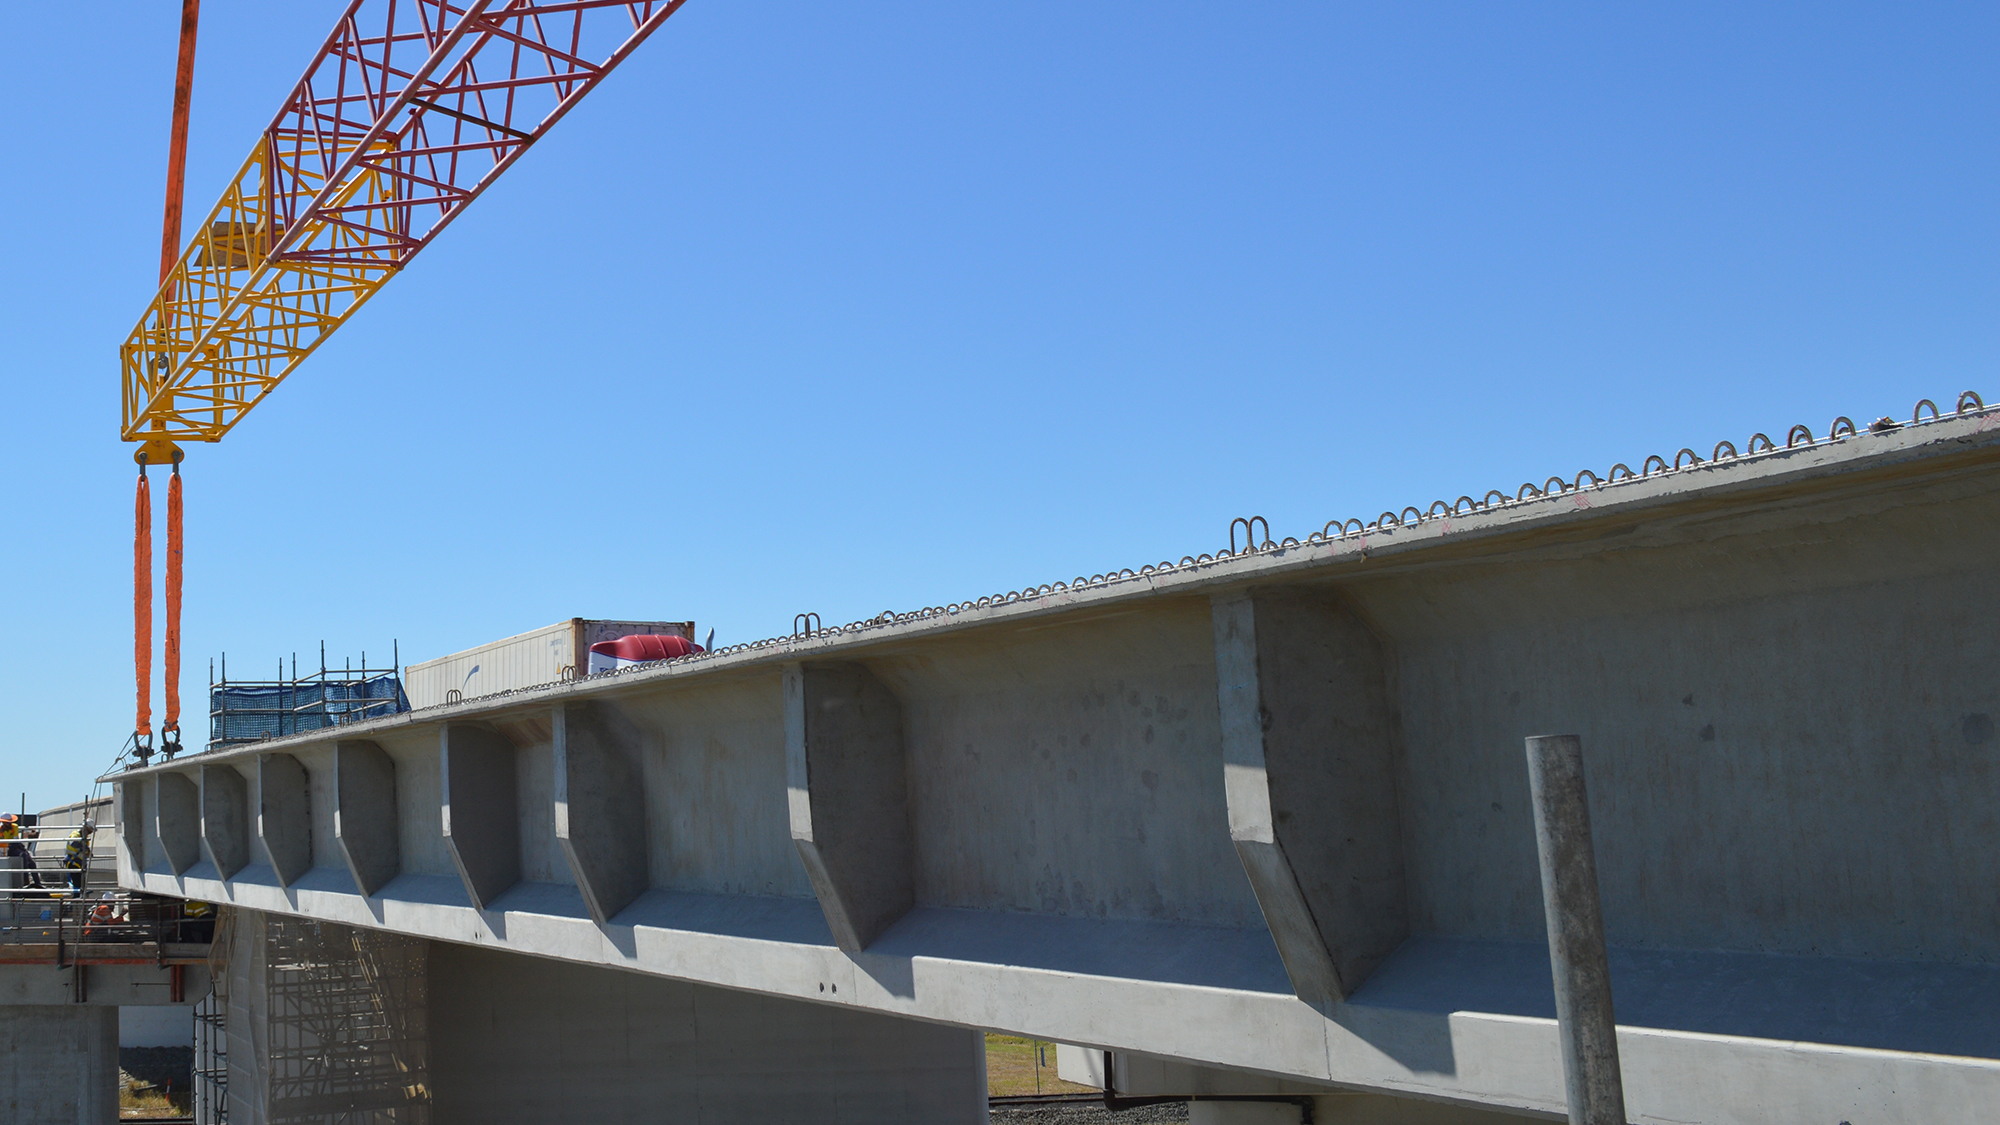 A Quickcell Super Girder is installed as part of the Port Drive Upgrade project